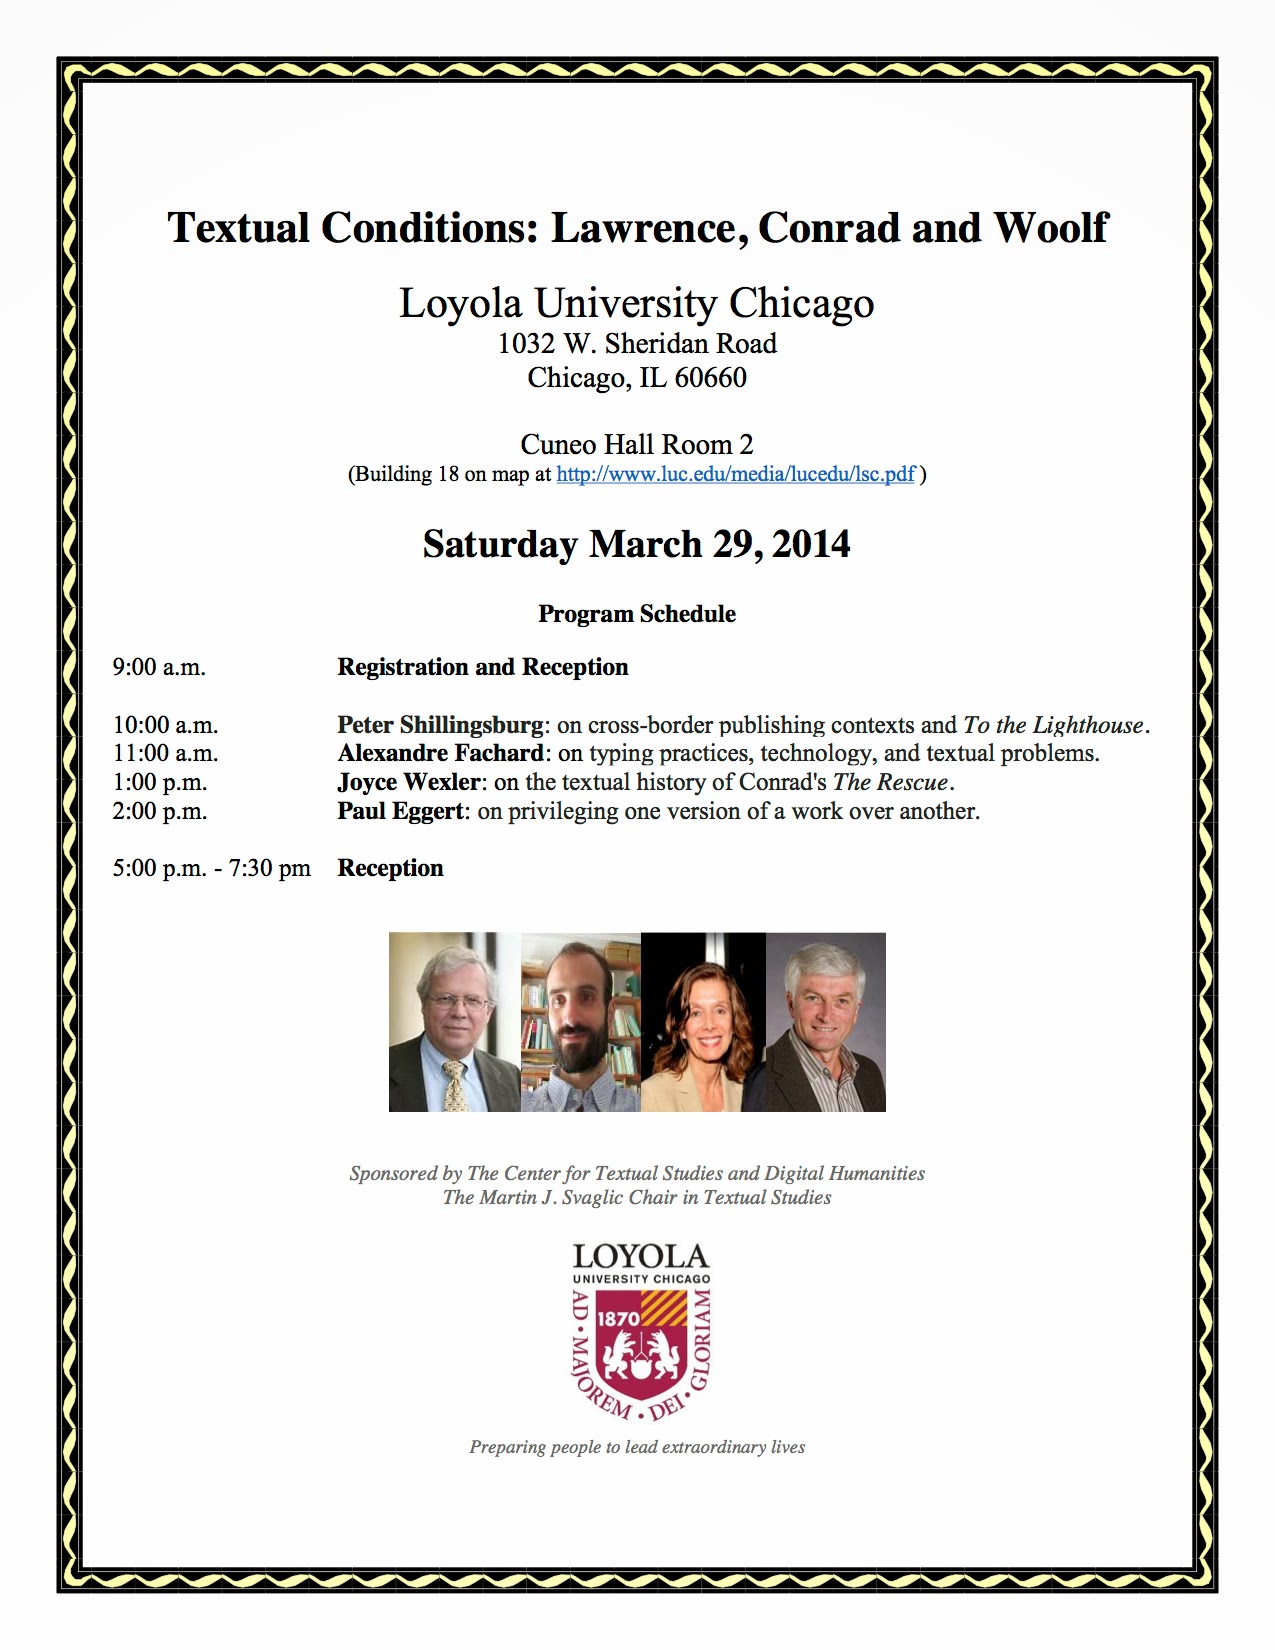 Textual Conditions: Lawrence, Conrad and Woolf - Peter Shillingsburg, Alexander Fachard, Joyce Wexler, Paul Eggert, March 29, 2014
